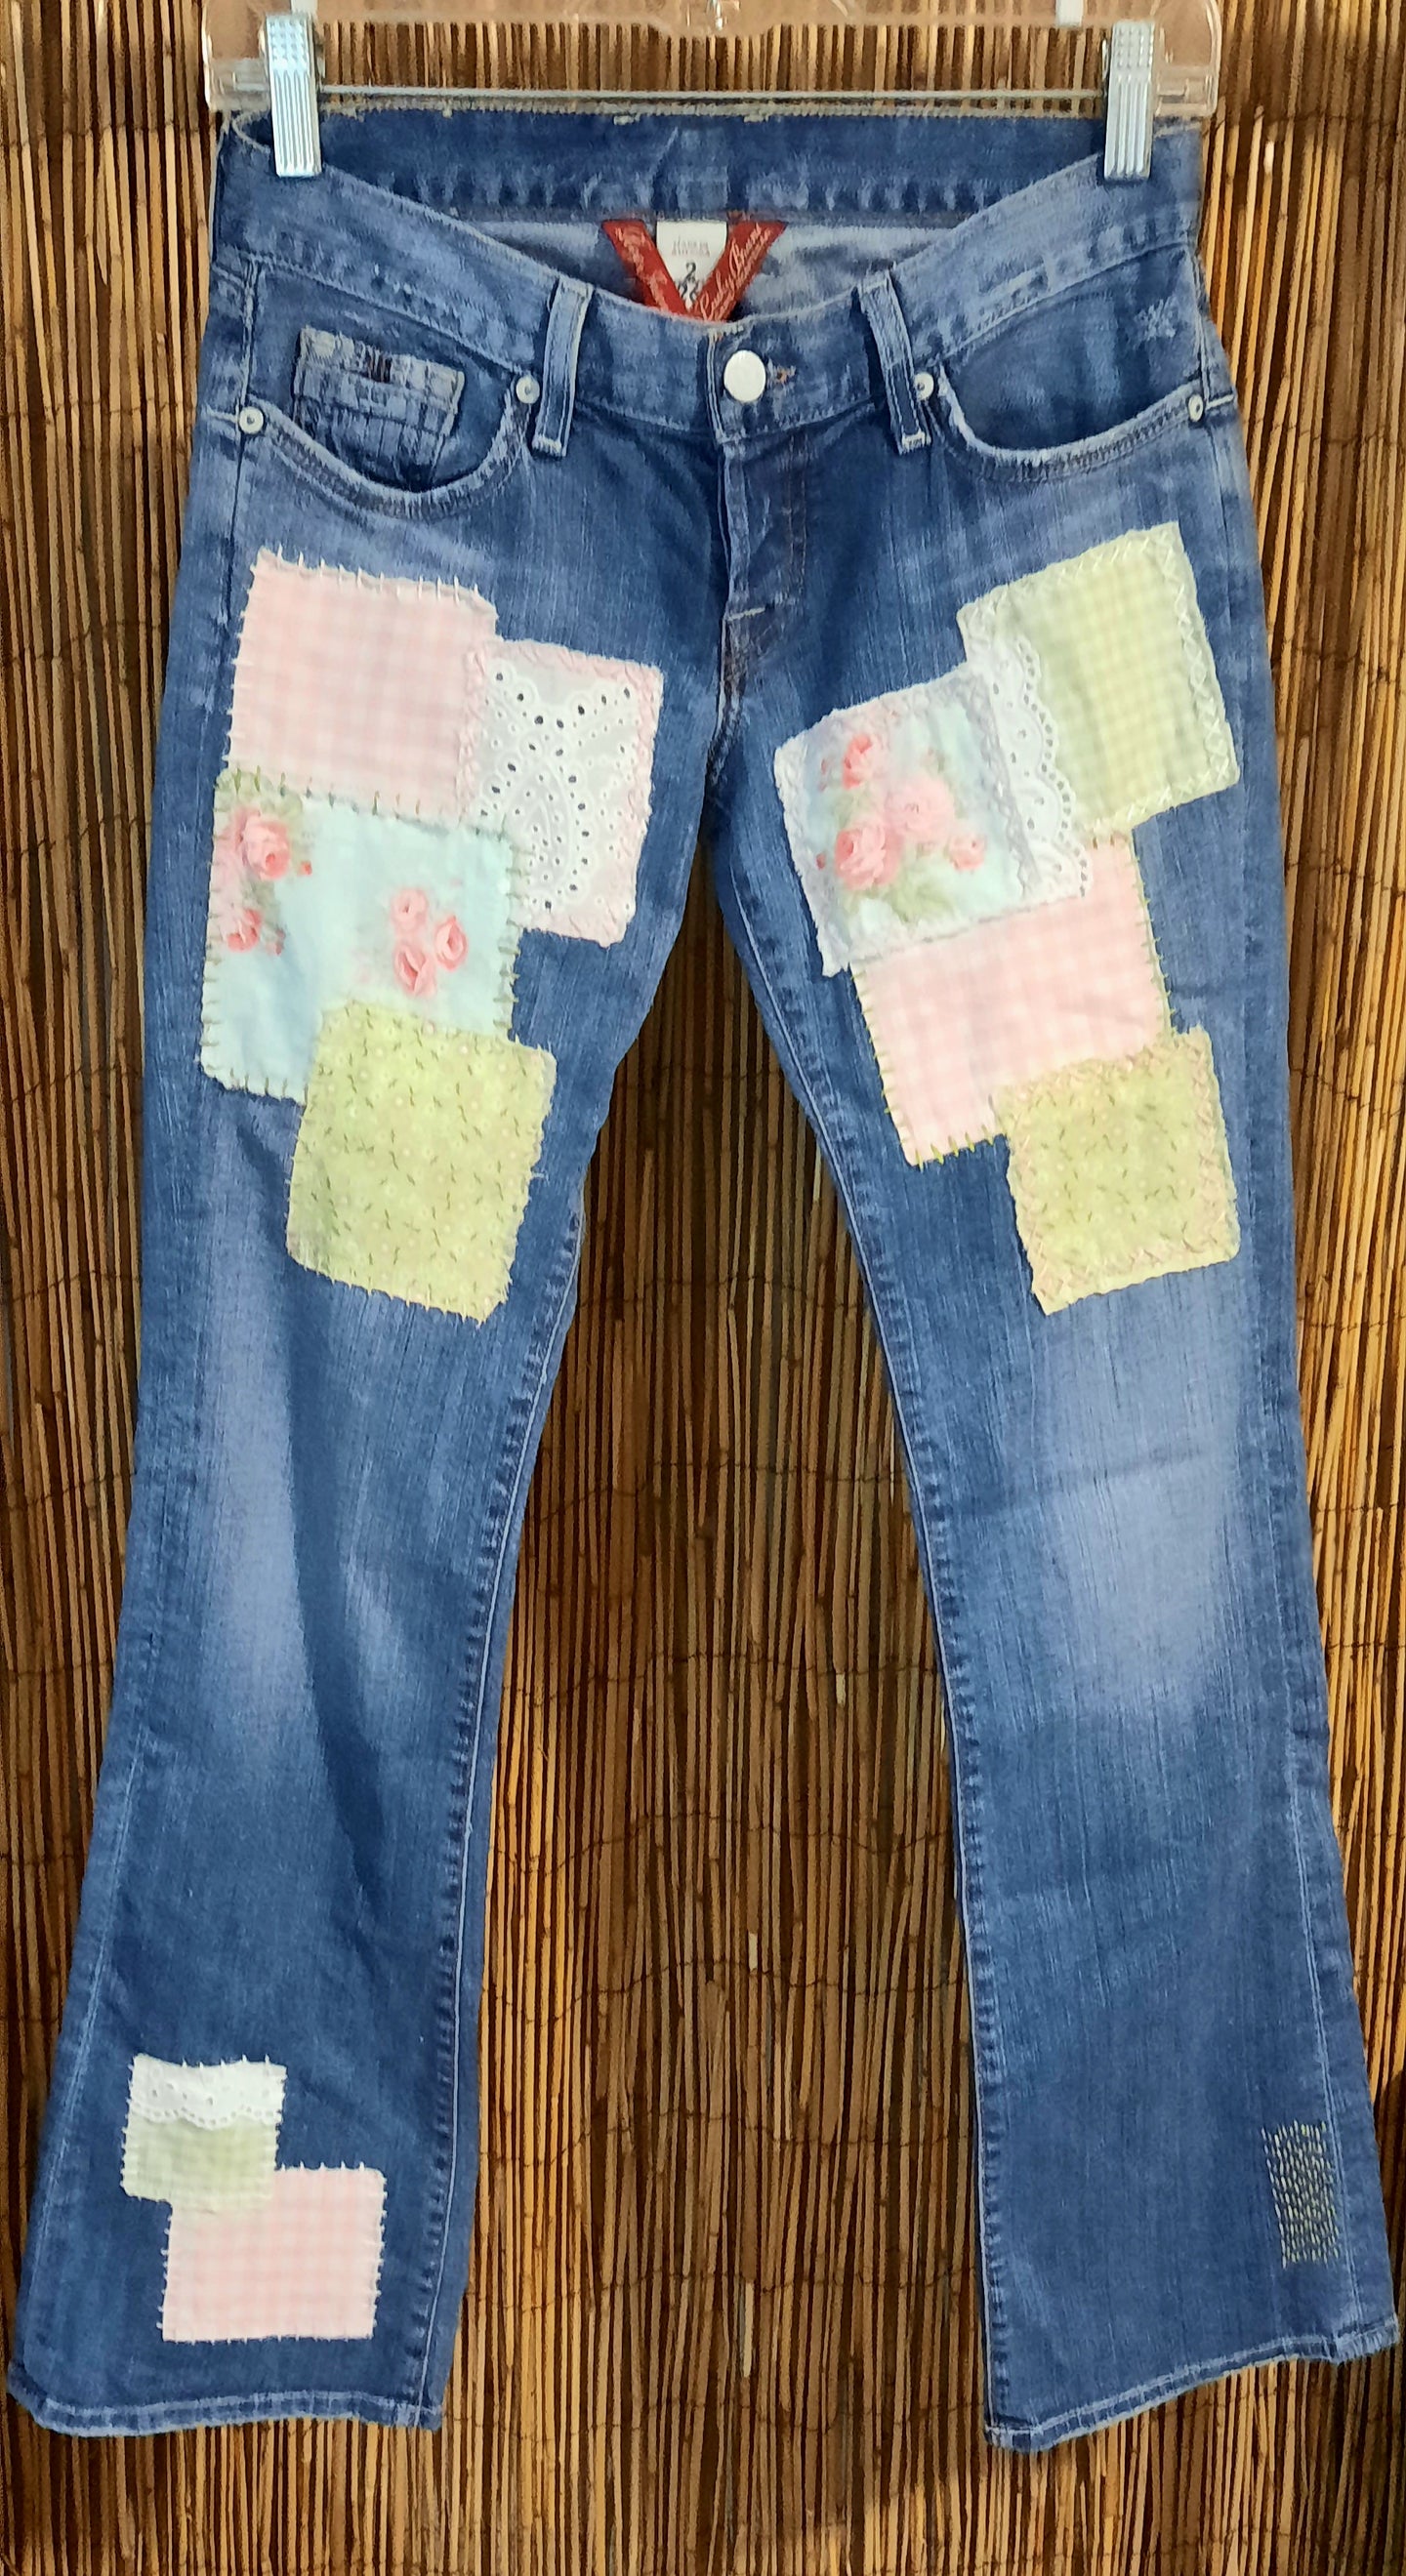 Upcycled Jeans/Boho/Shabby Chic/Repurposed Jeans